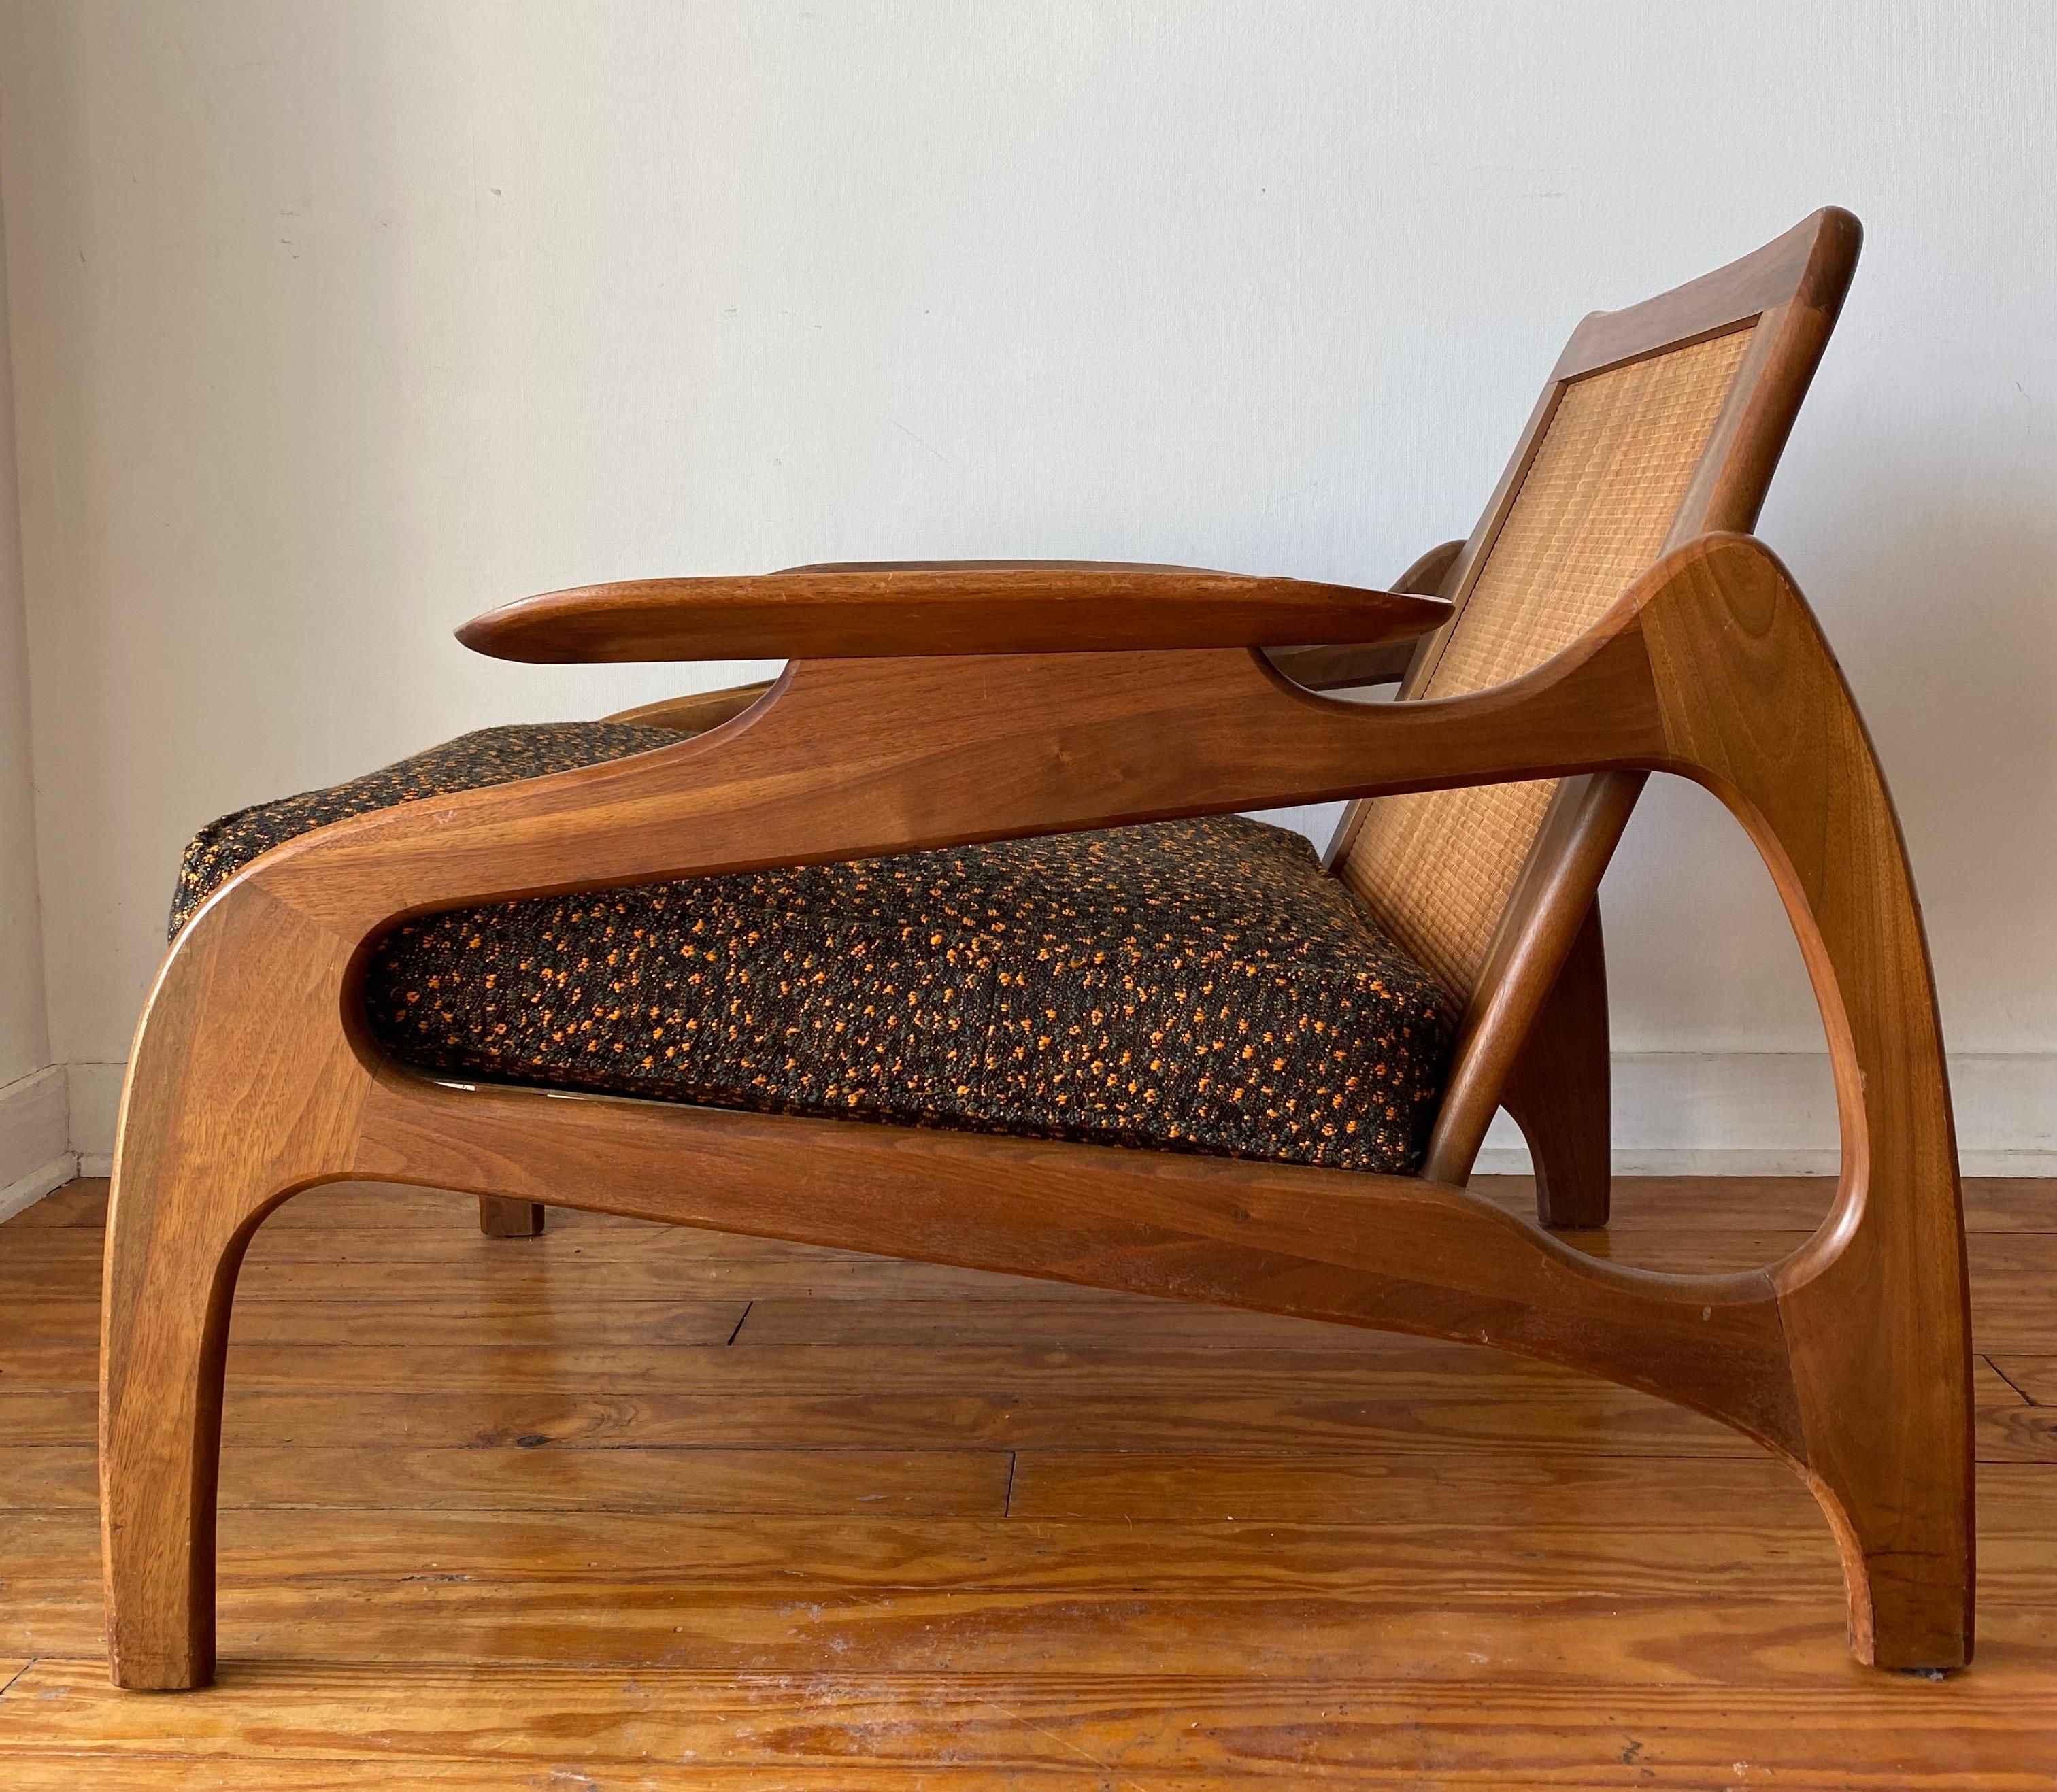 Model 1209-C for Craft Associates. 

Walnut, cane back, upholstery. Seat has been re-done in Raf Simons for Kvadrat fabric. 

Good condition, some wear on walnut structure. Strapping could be re-done.

Provenance: c. 1960s, USA. When